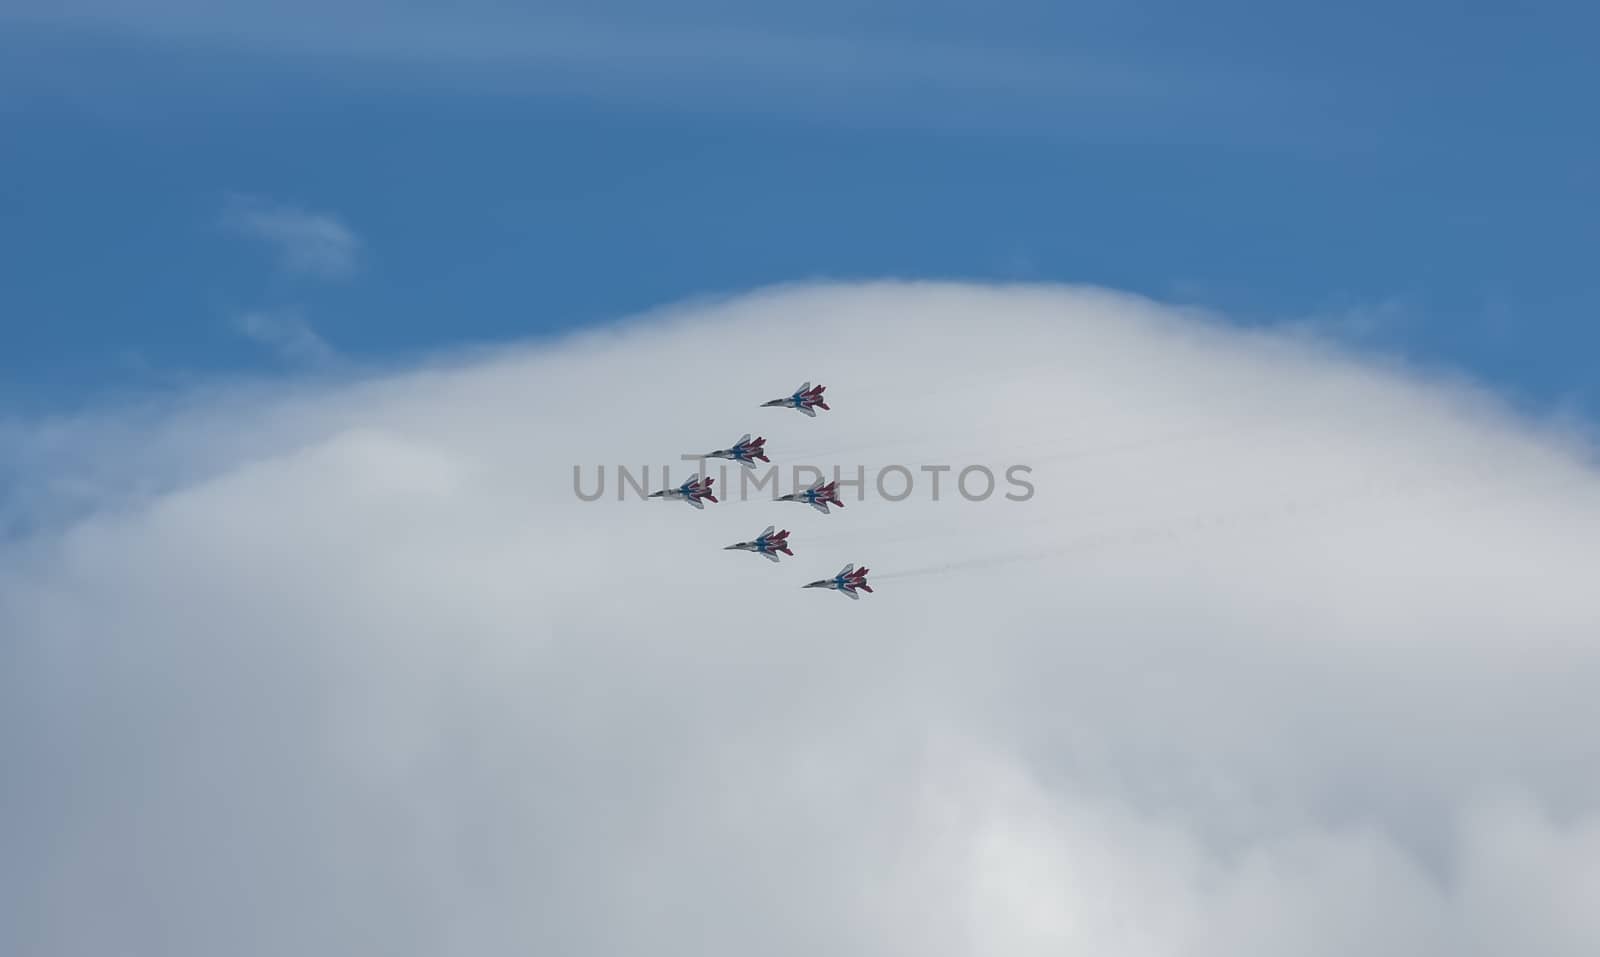 Barnaul, Russia - September 18, 2020: A low angle distant shot of Strizhi MiG-29 fighter jet squadron performing stunts during an aeroshow. Blue cloudy sky as a background.